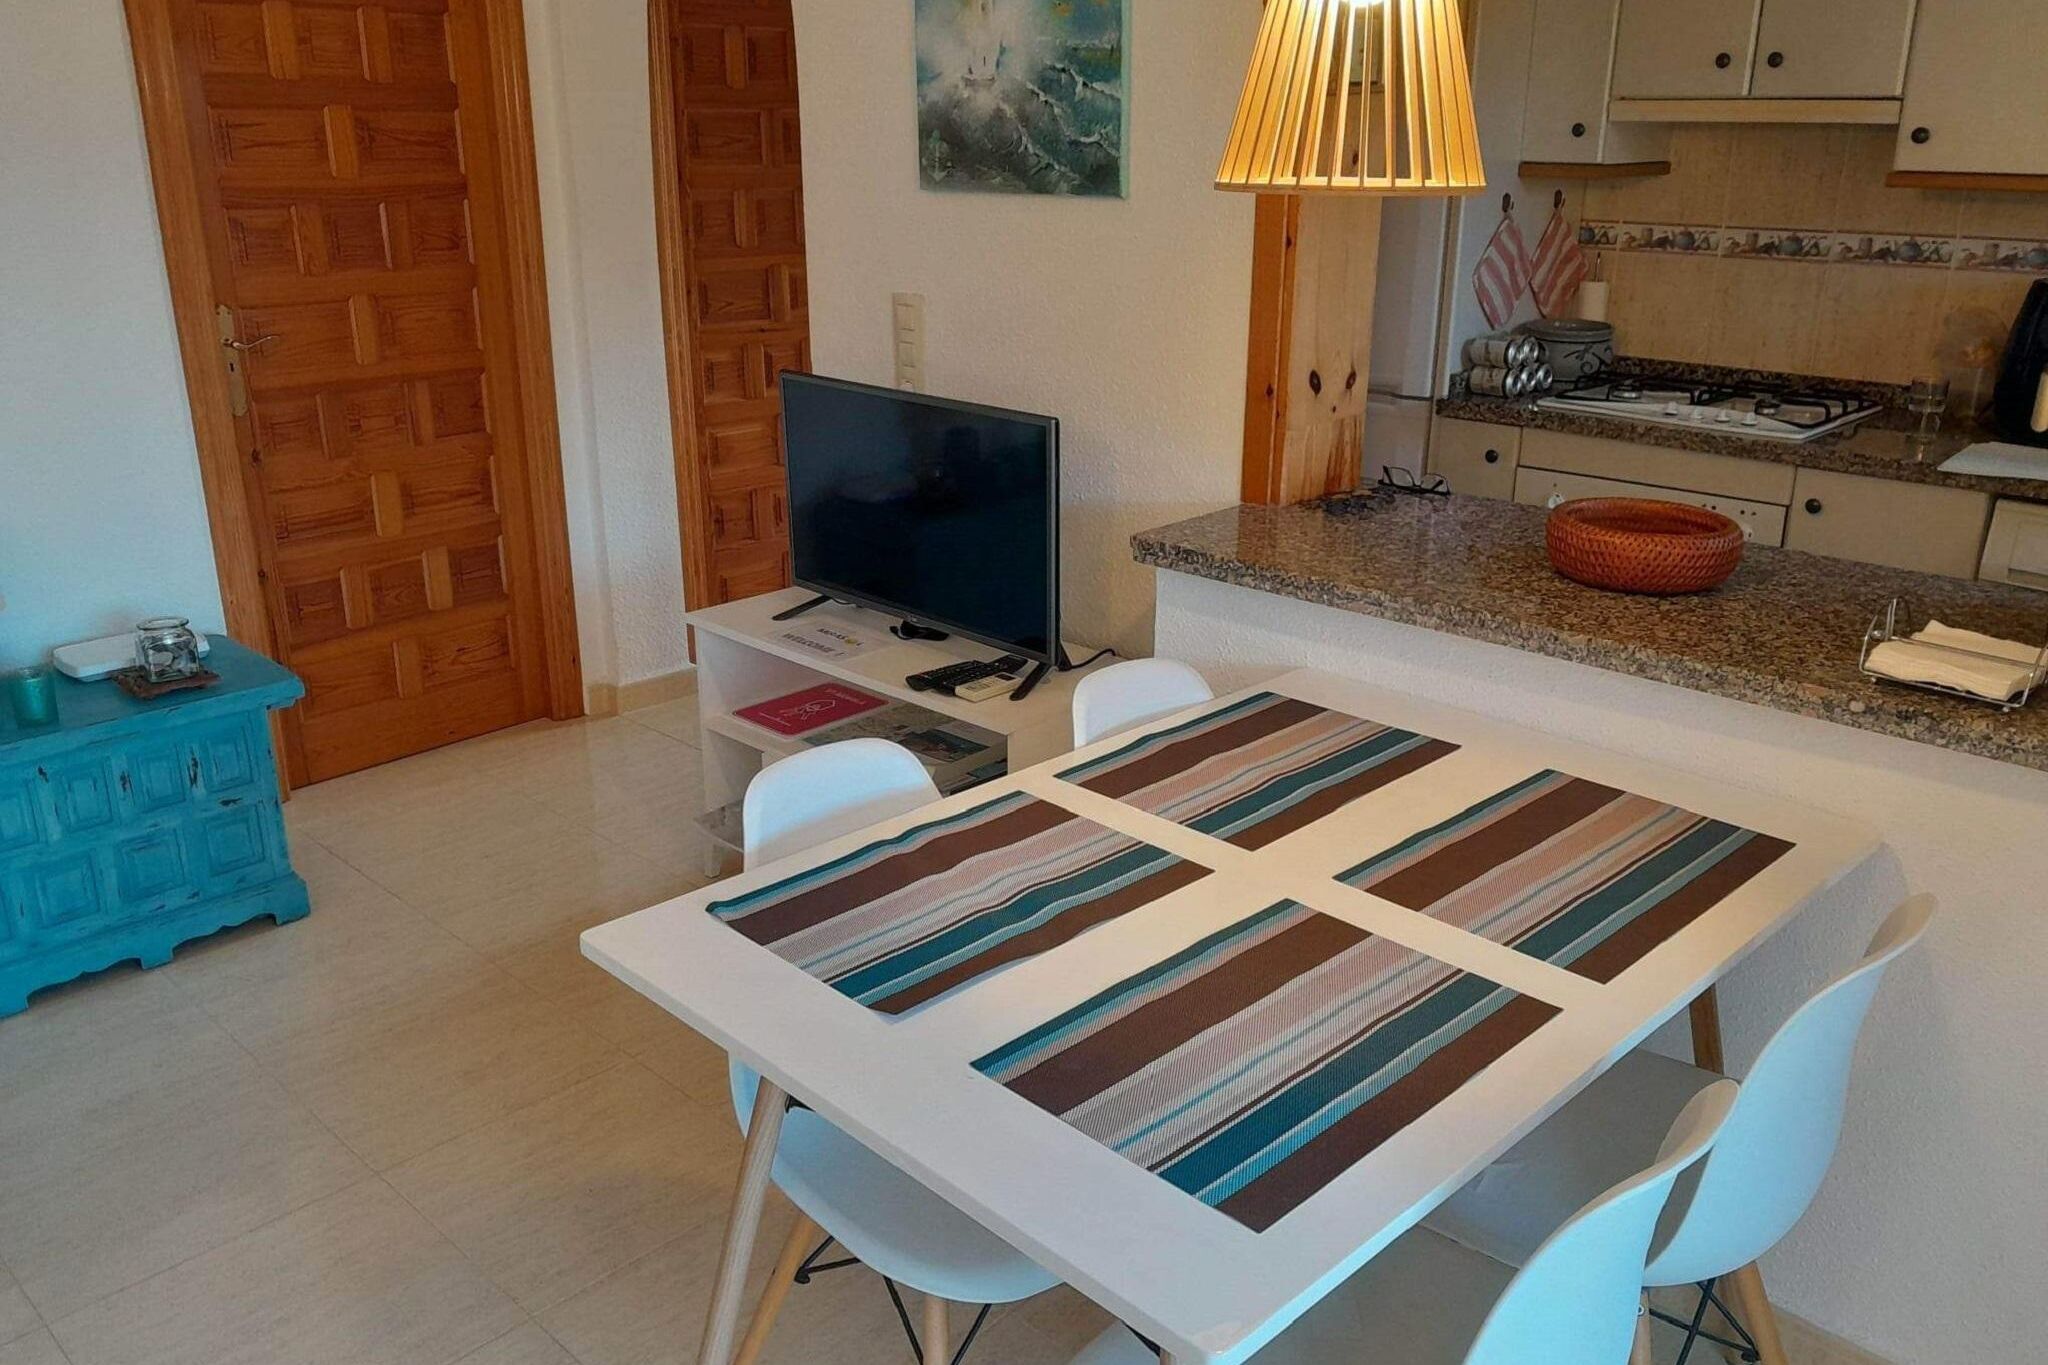 Modern apartment in Moraira with beautiful views 5 minutes from the beach